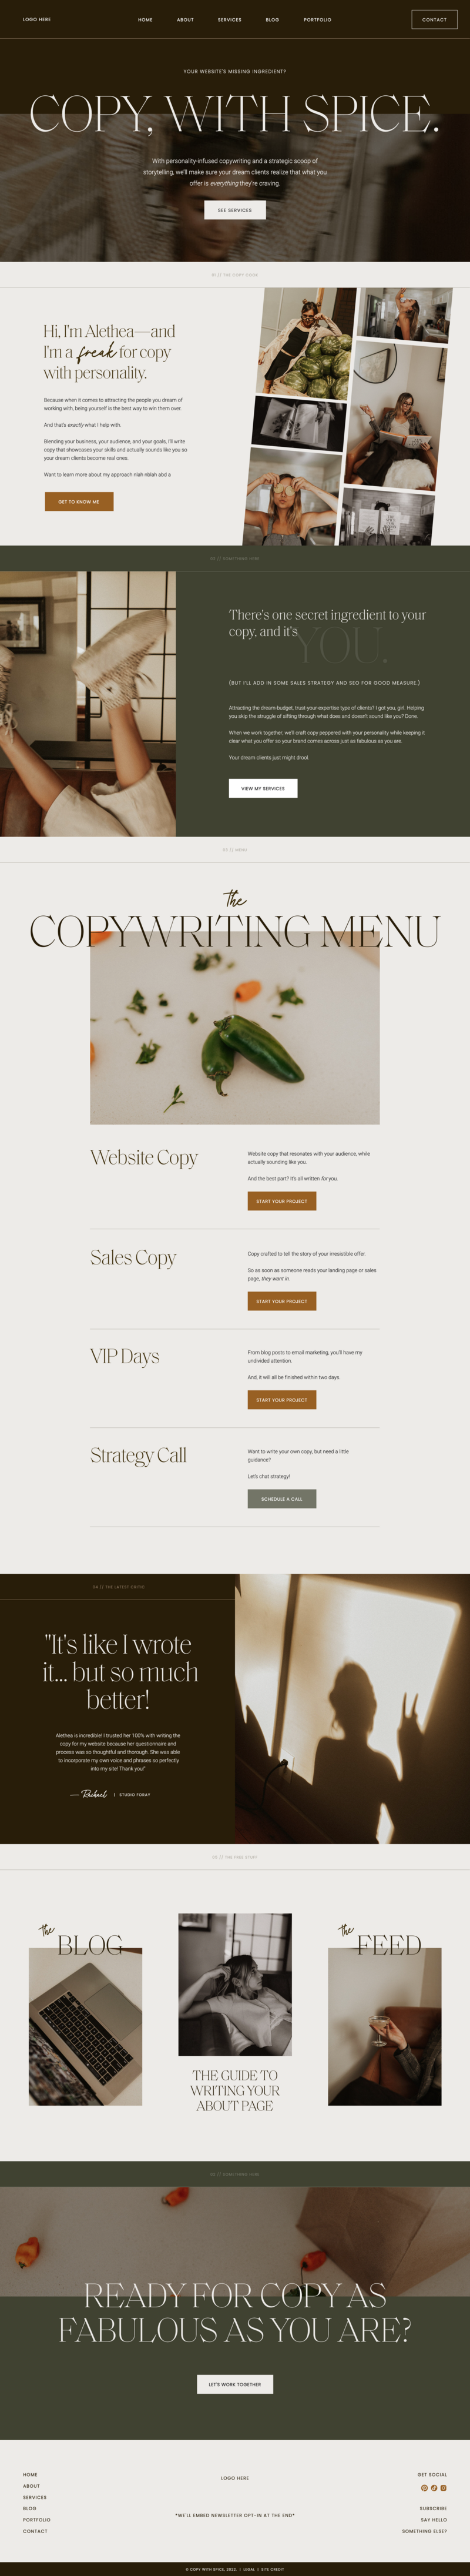 Site Series Copy Before and After with Copy With Spice